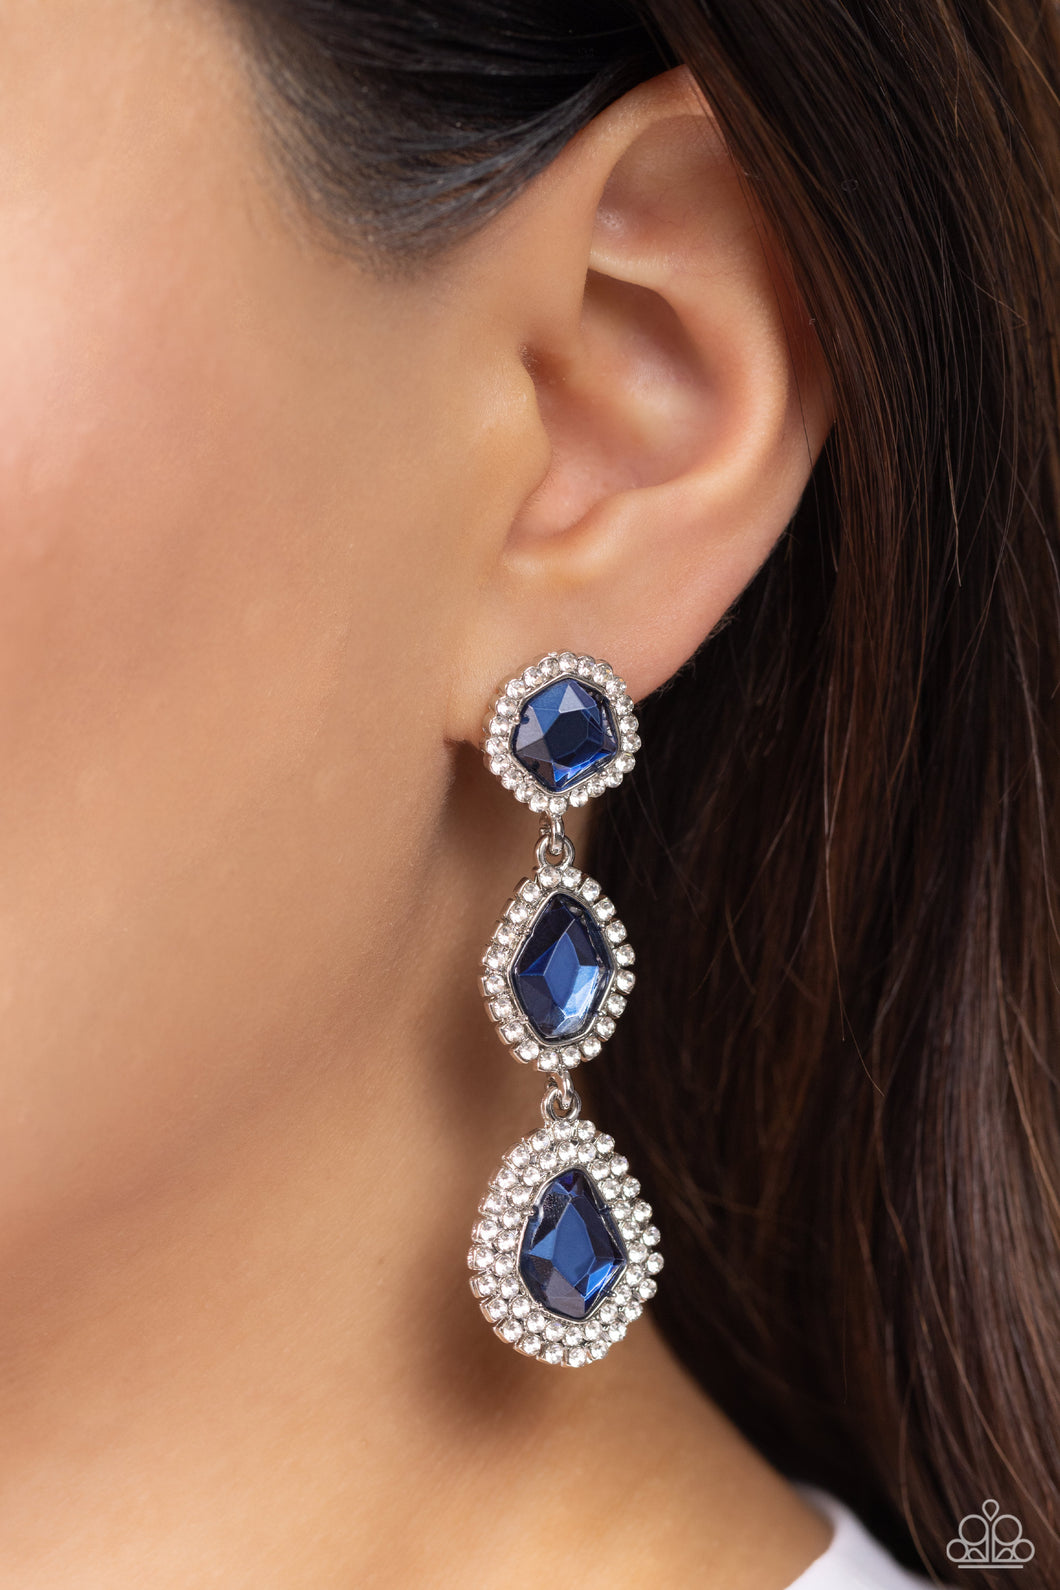 Paparazzi “Prove Your ROYALTY” Blue Dangle Earrings